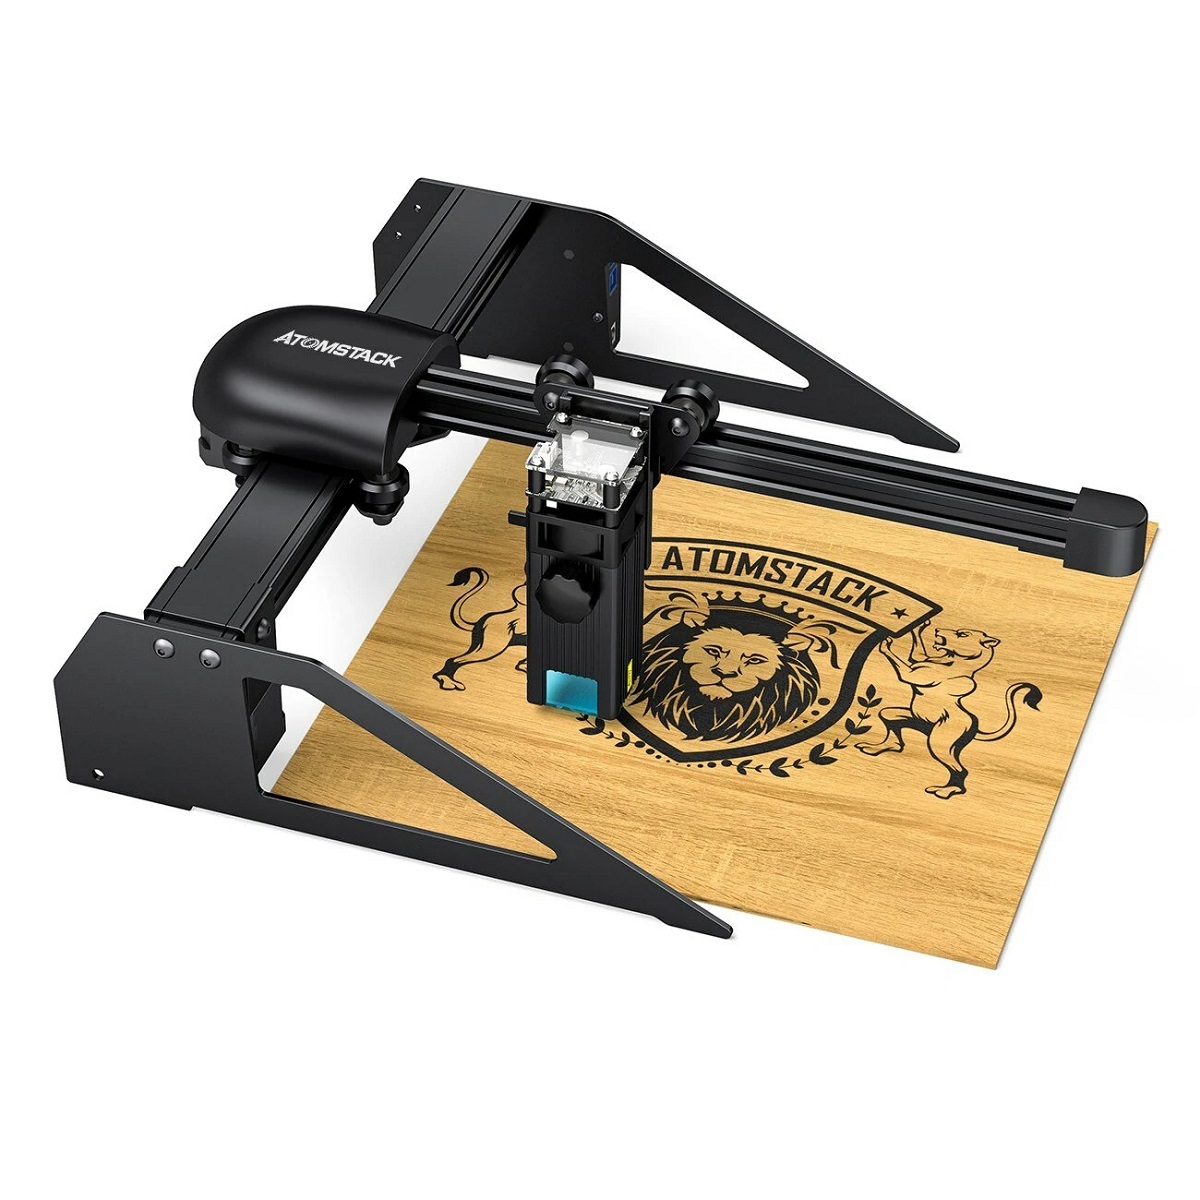 Find [EU DIRECT] ATOMSTACK P7 M30 Portable Laser Engraving Machine Cutter Wood Cutting Single Arm Laser Engraver Eye Protection Metal Engraving for Sale on Gipsybee.com with cryptocurrencies